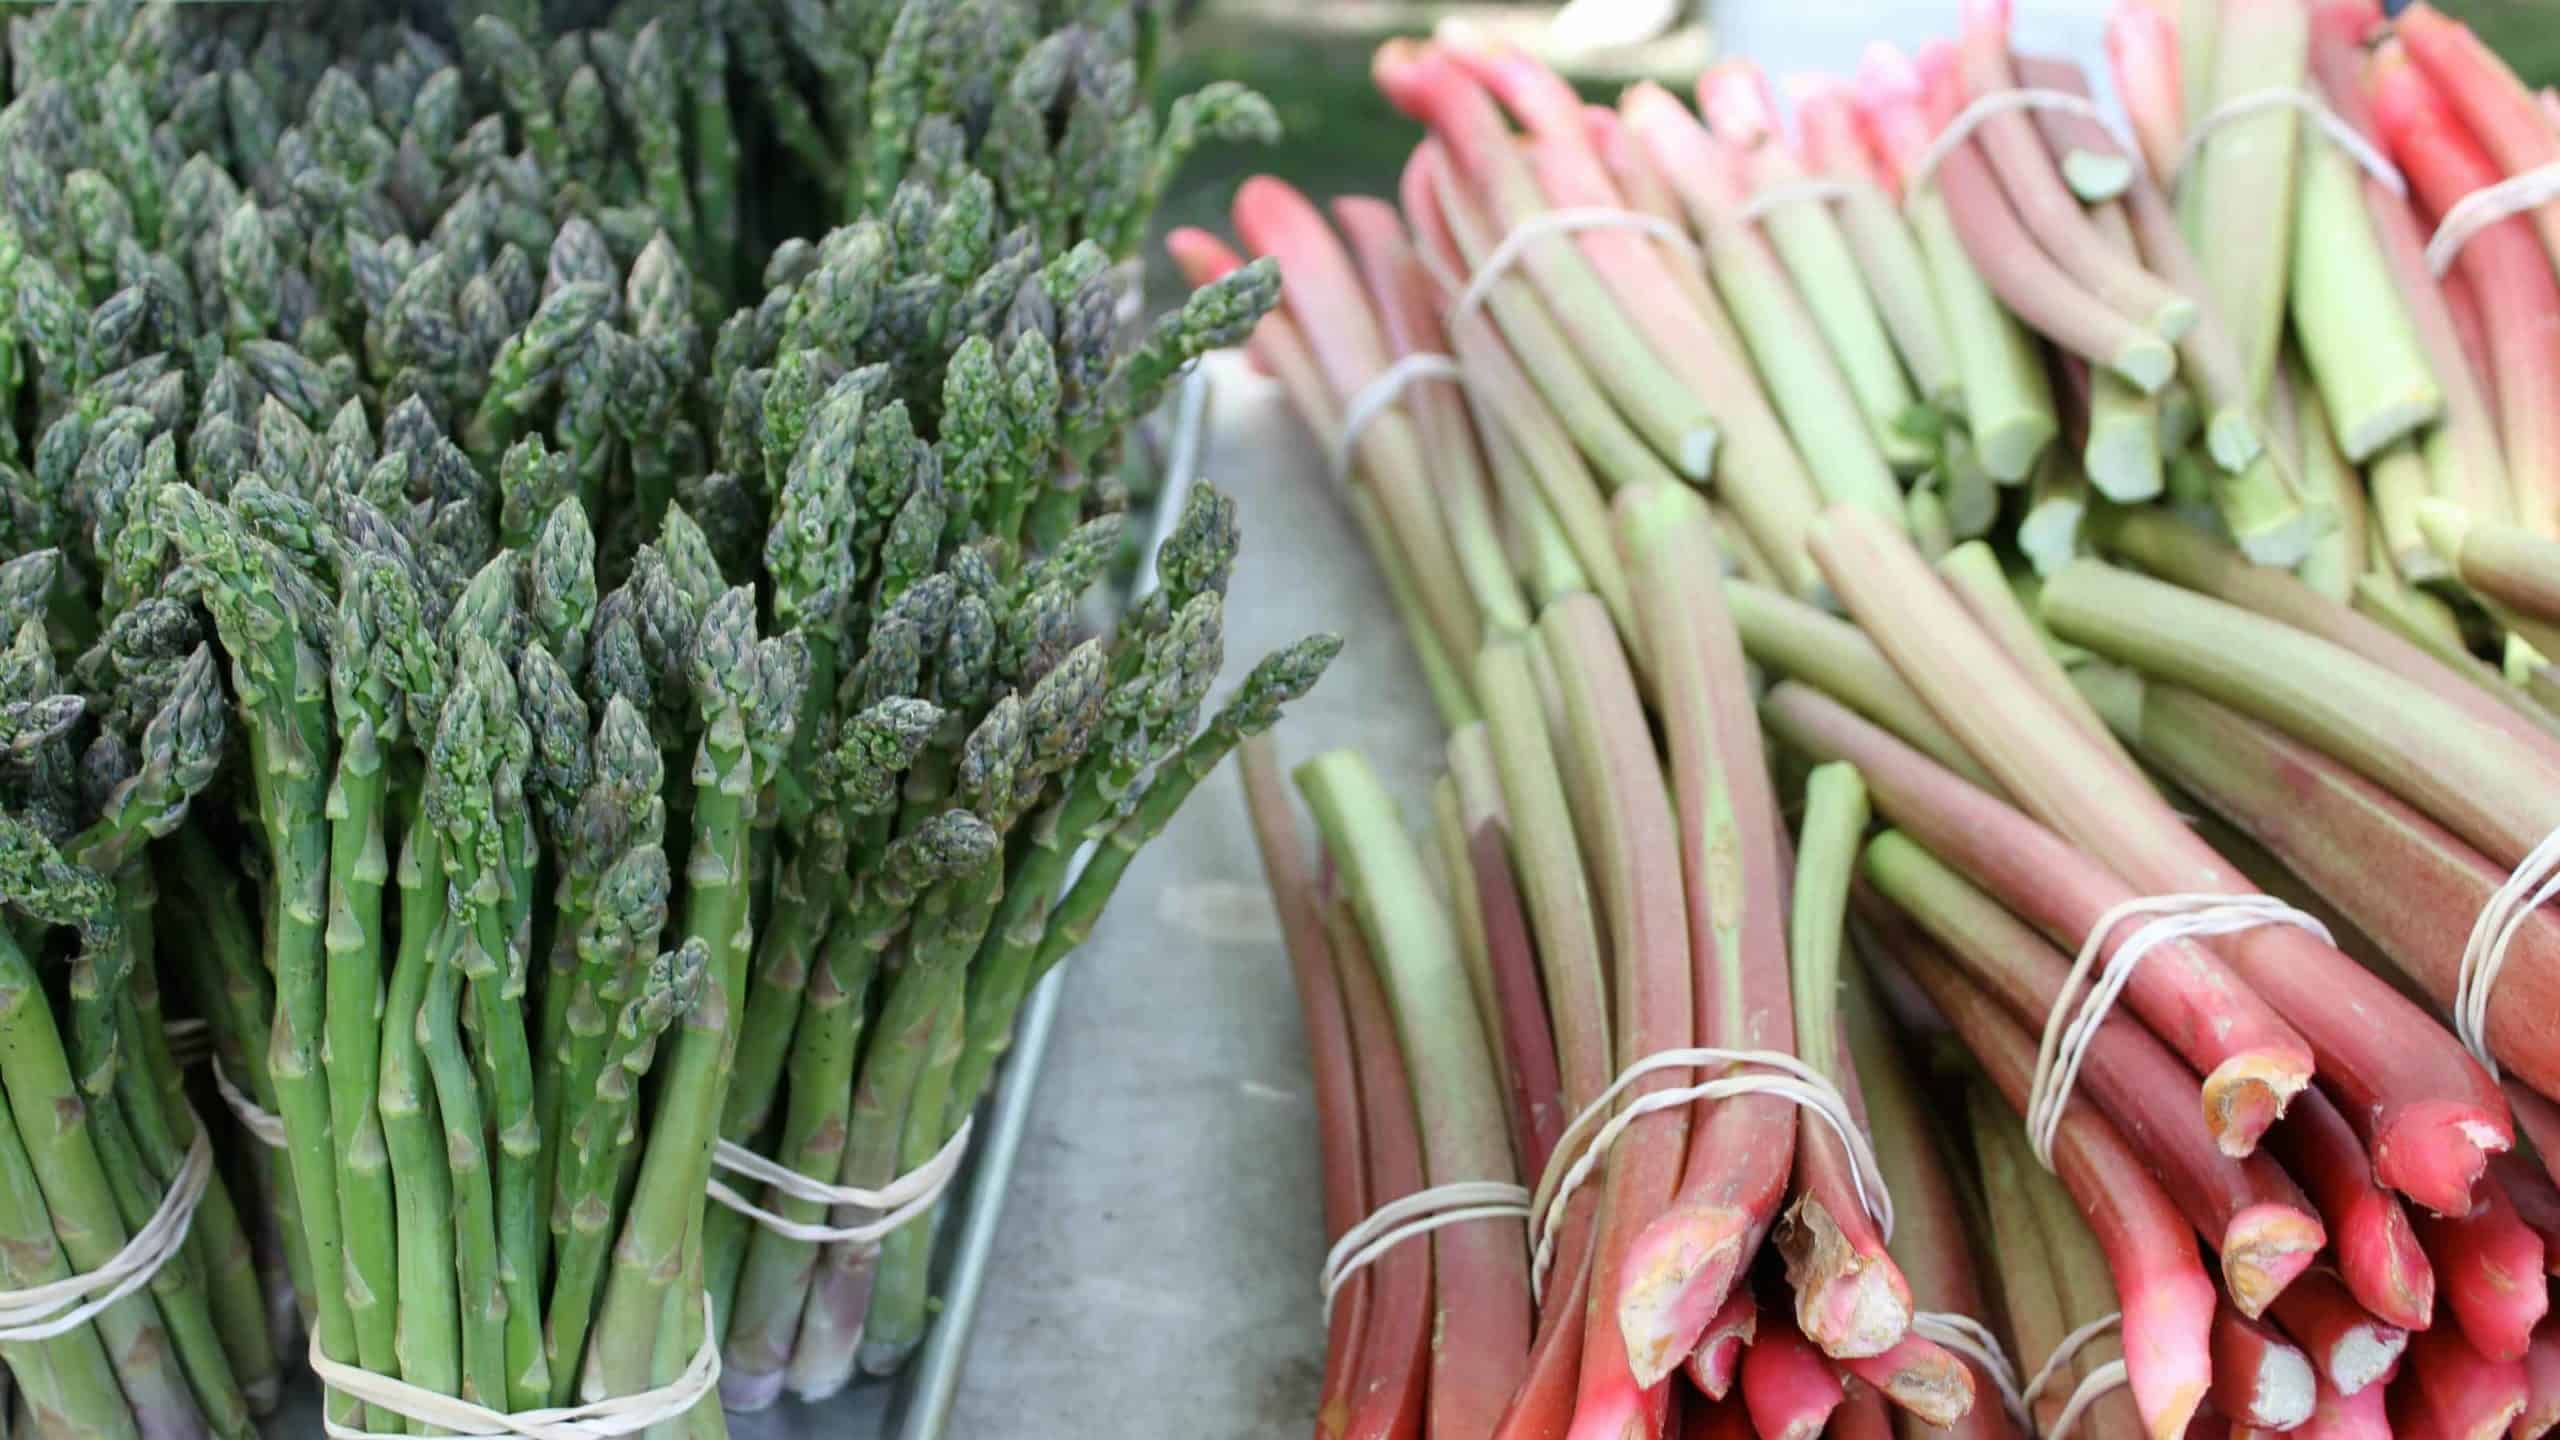 Asparagus and rhubarb glimmer early in the season at the Lenox Farmers Market.